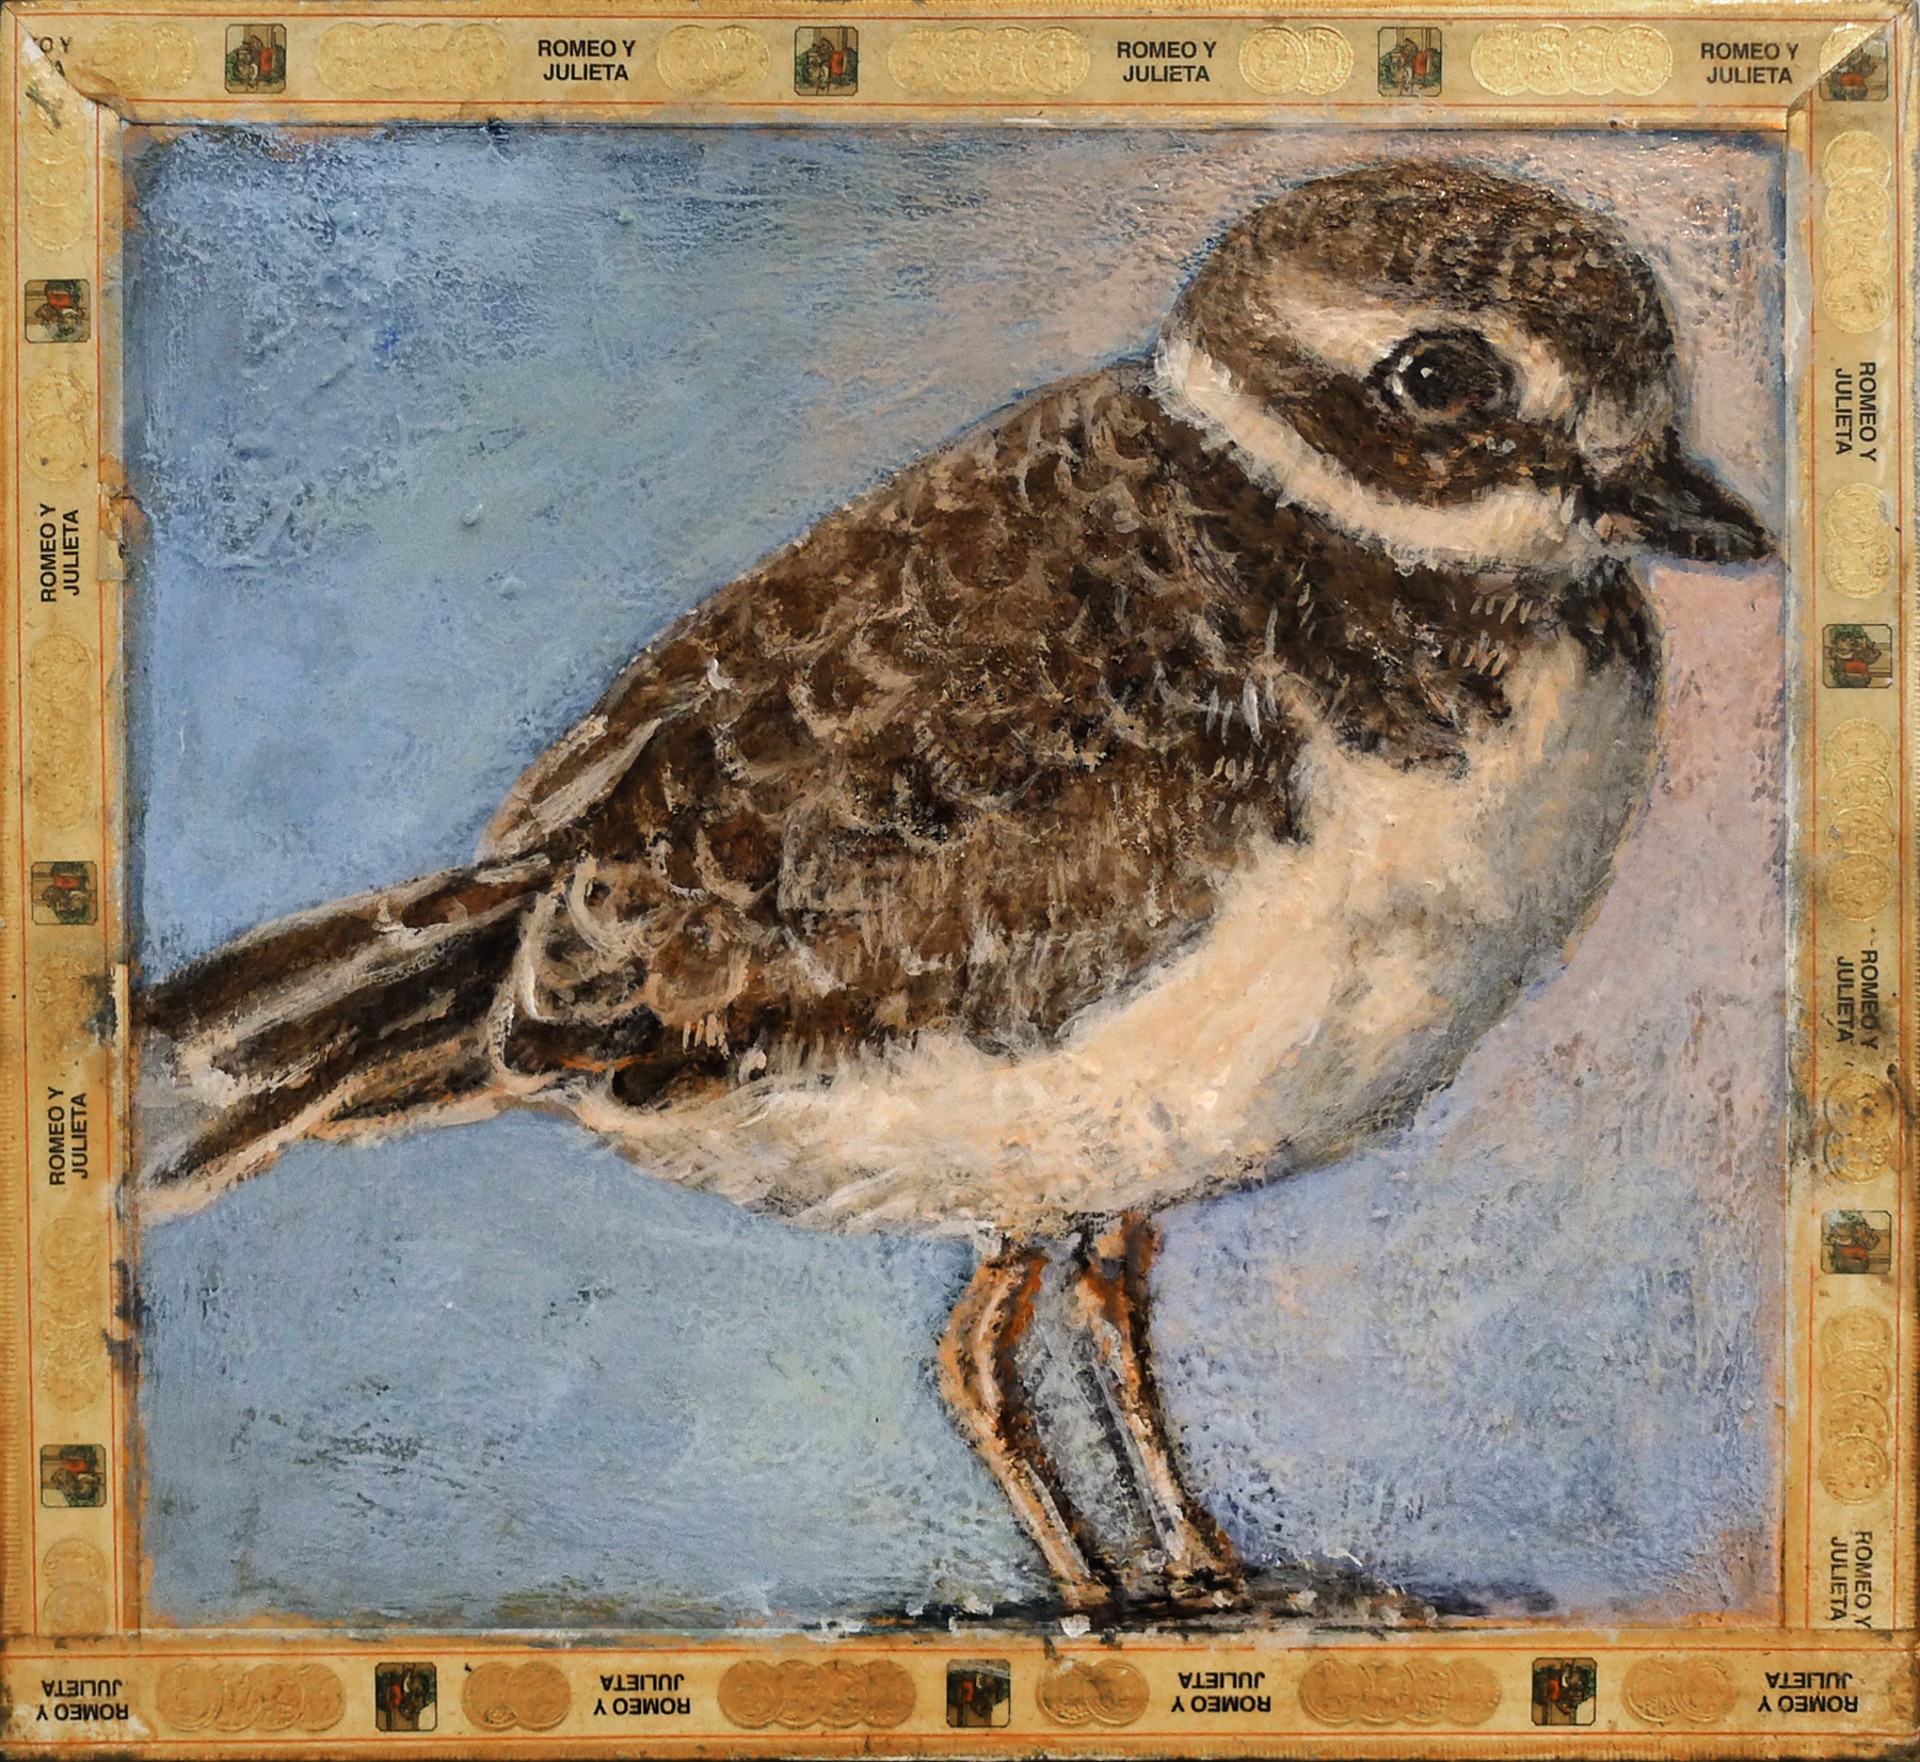 Plover / Romeo and Julieta by Ed Musante